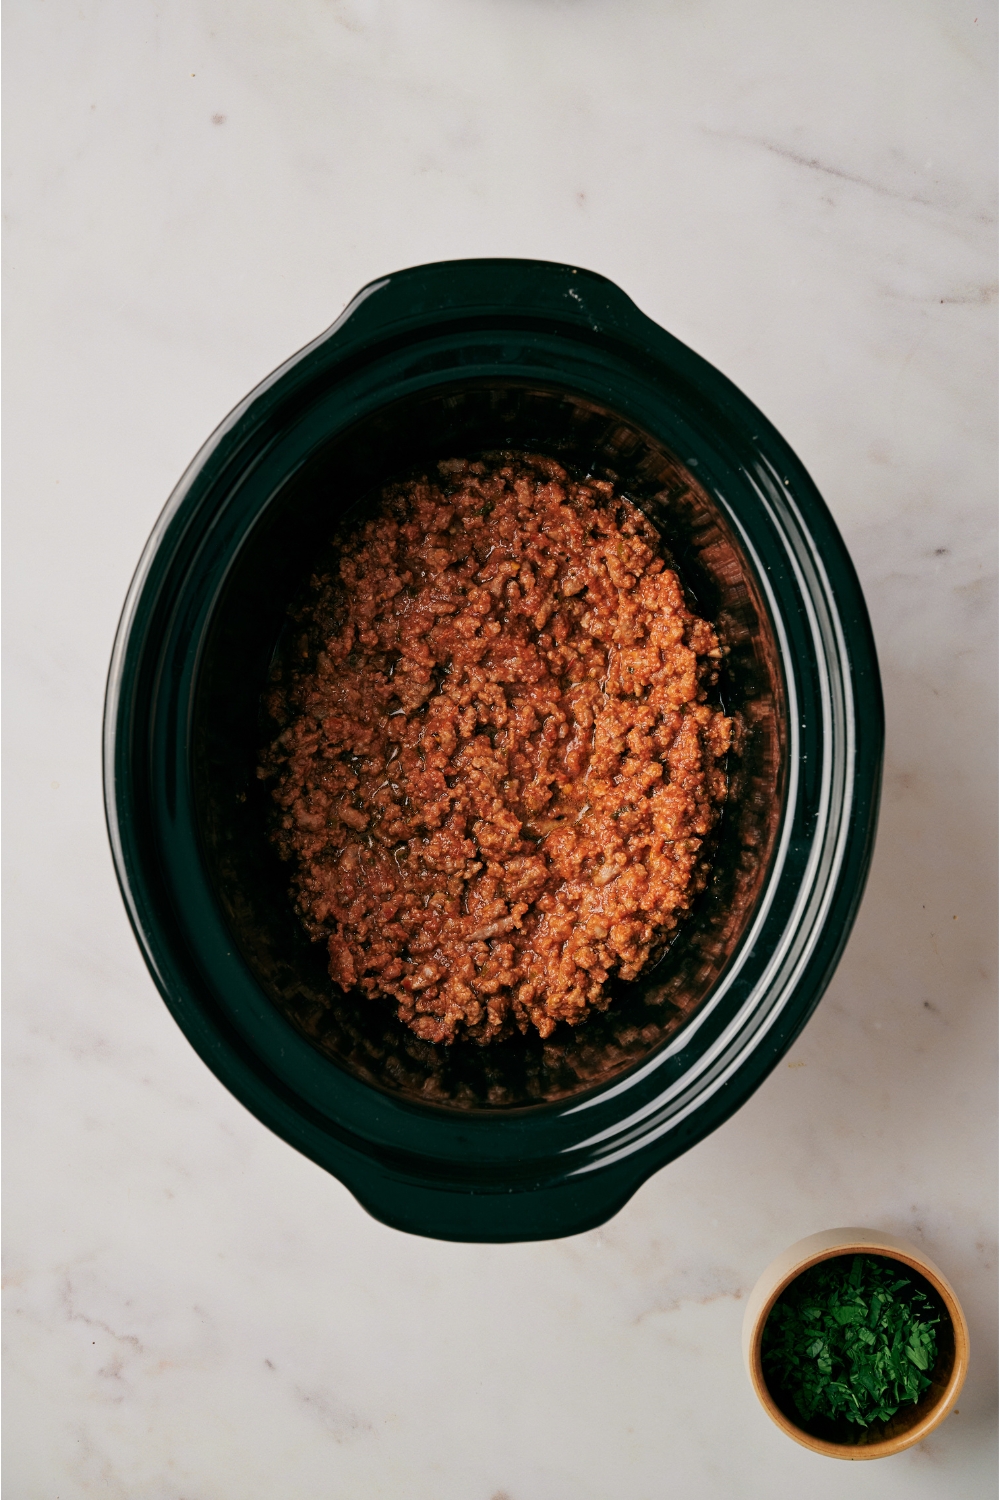 A slow cooker filled with cooked and seasoned ground beef.